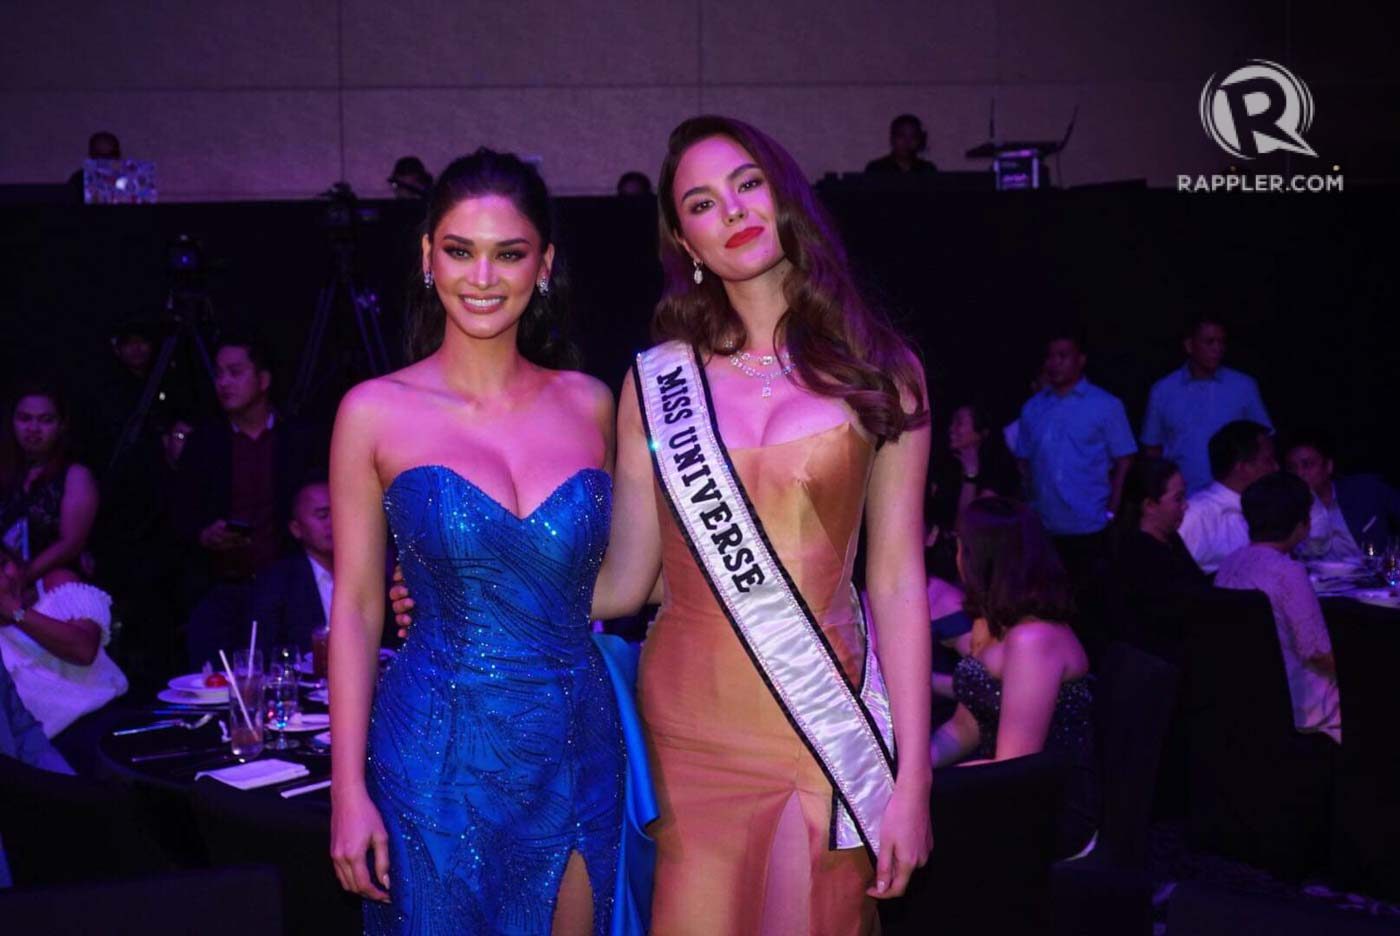 IN PHOTOS: Catriona Gray, Pia Wurtzbach lead Miss Universe Philippines 2019 charity gala